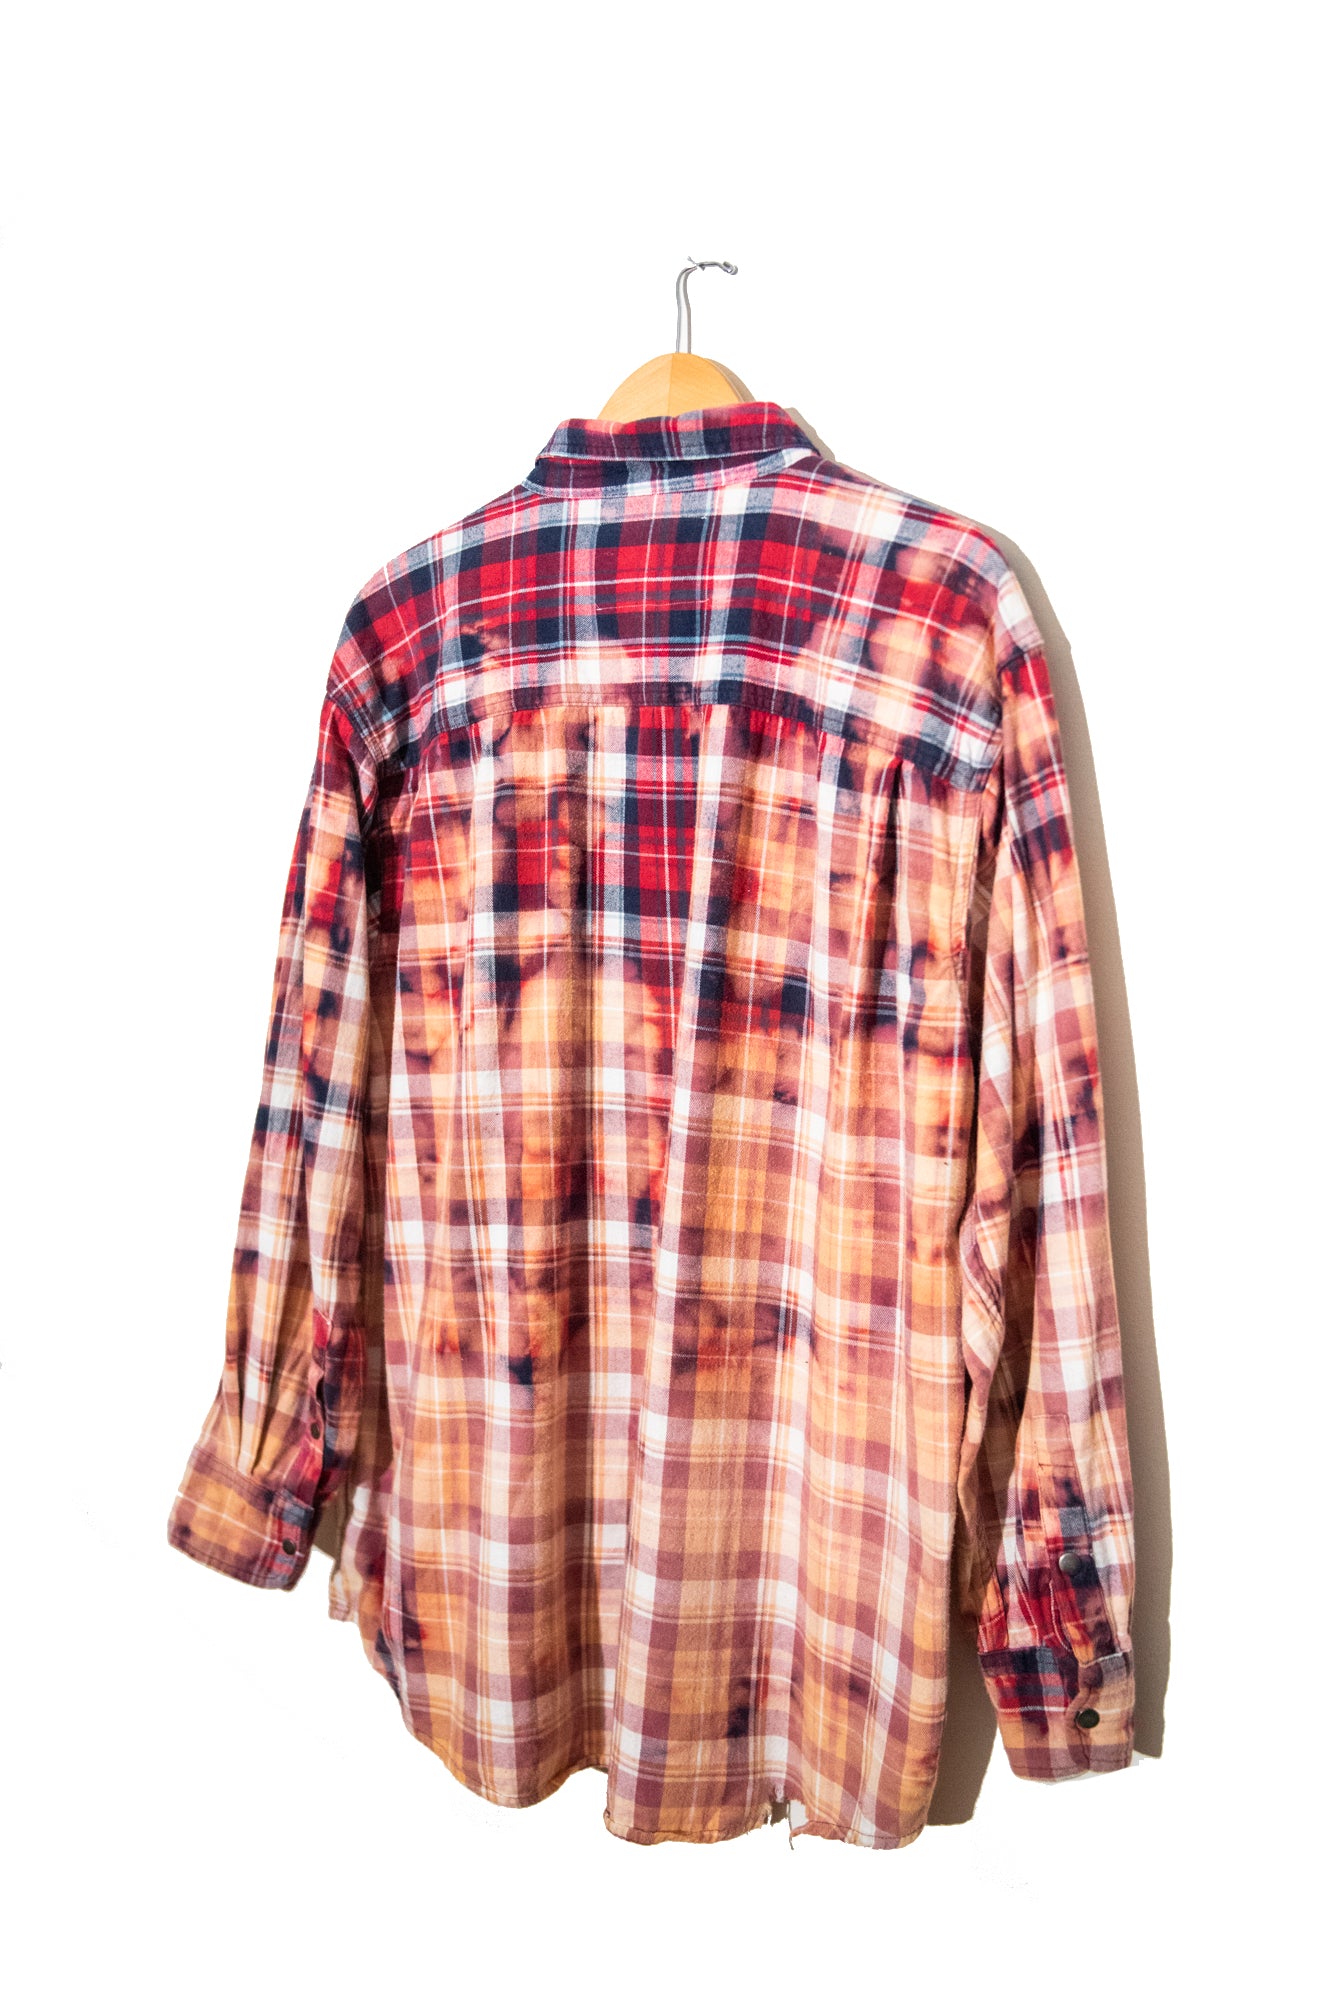 Dyed Plaid Button-UP (XXL)